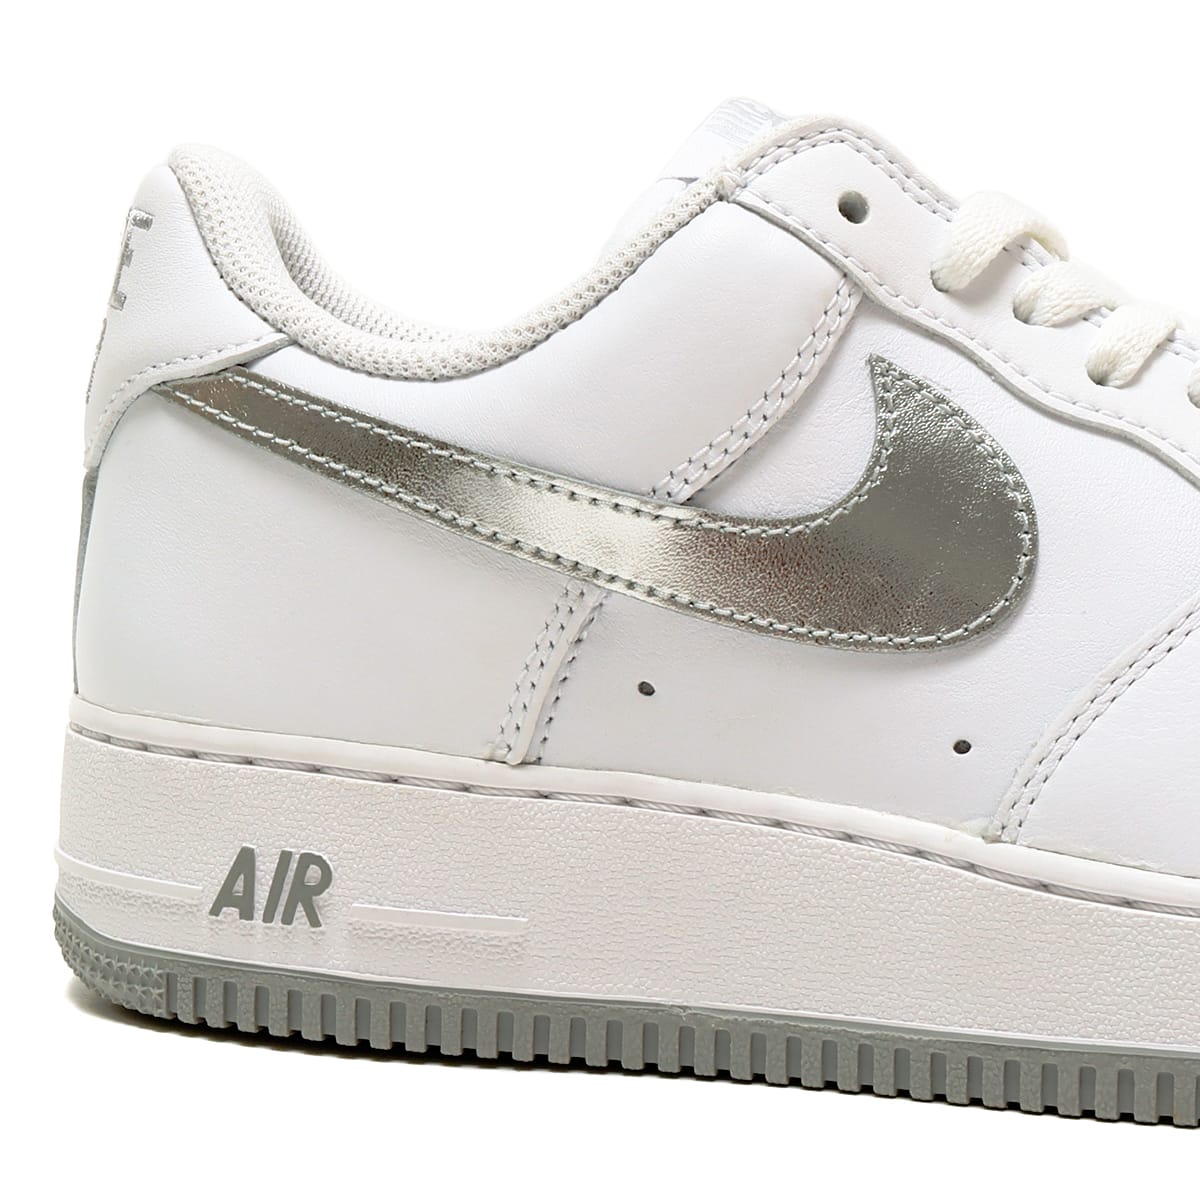 the 10 nike air force 1 low